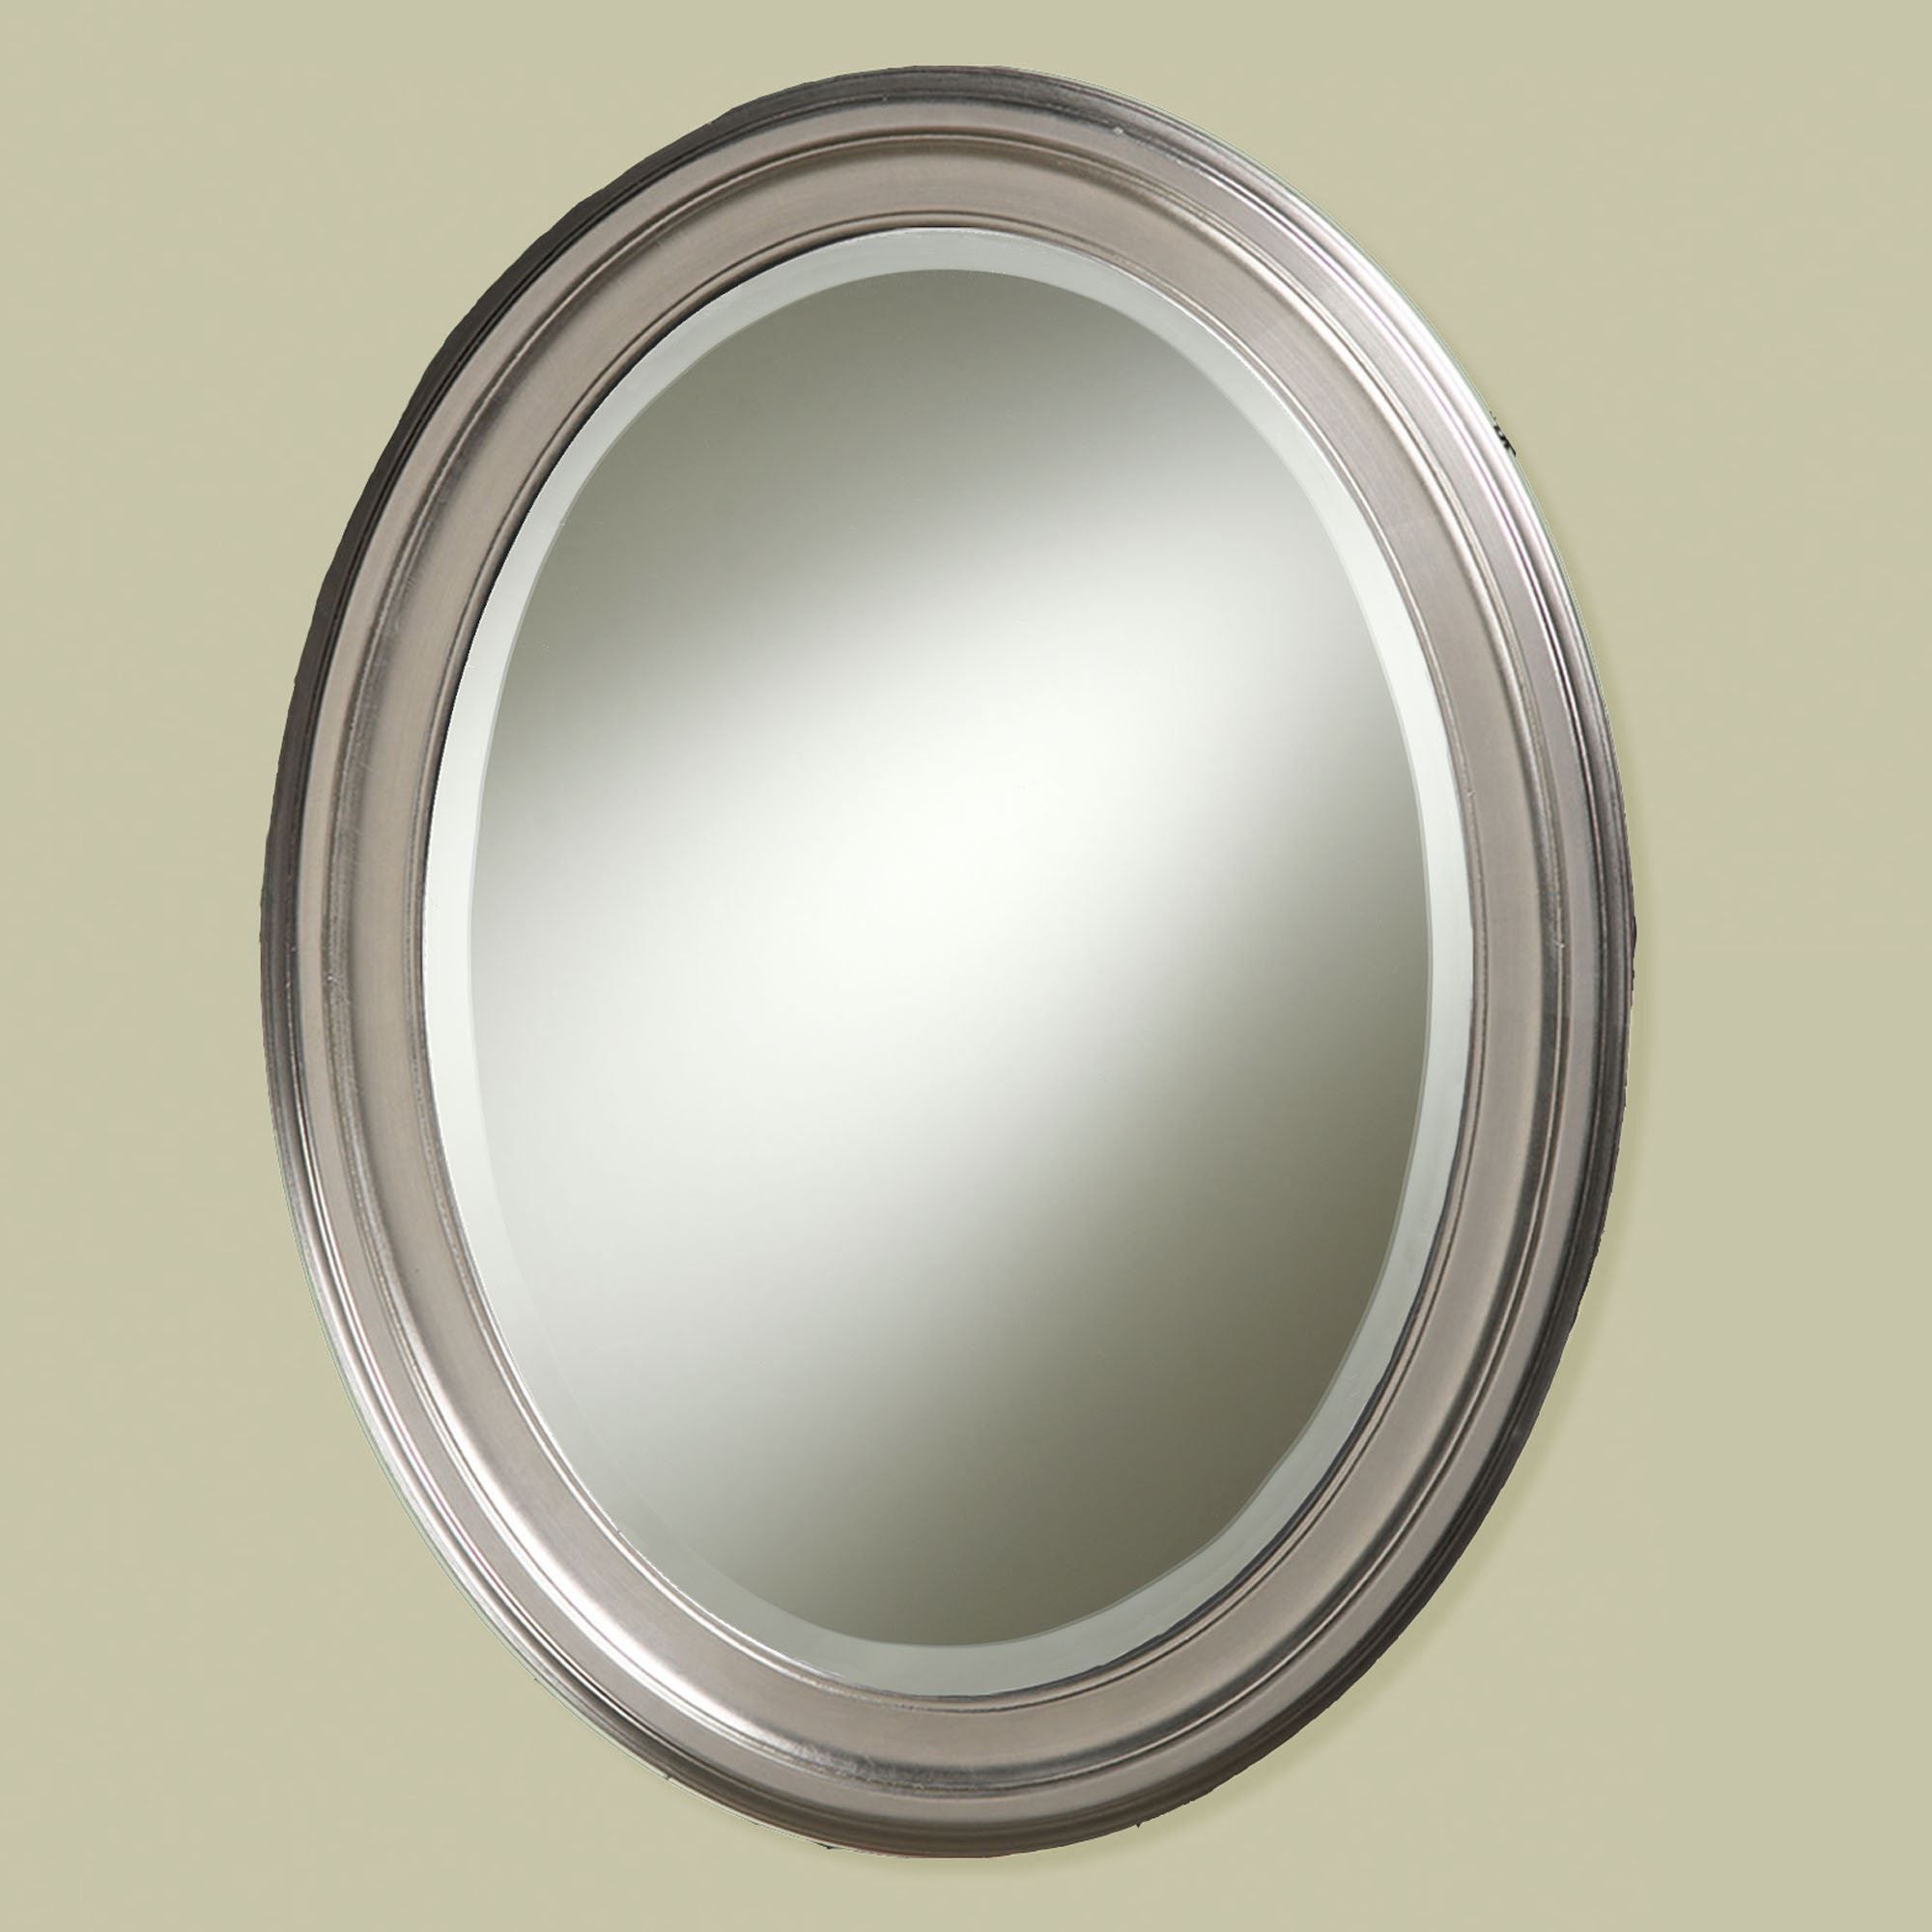 Loree Brushed Nickel Finish Oval Wall Mirror With Nickel Floating Wall Mirrors (View 6 of 15)